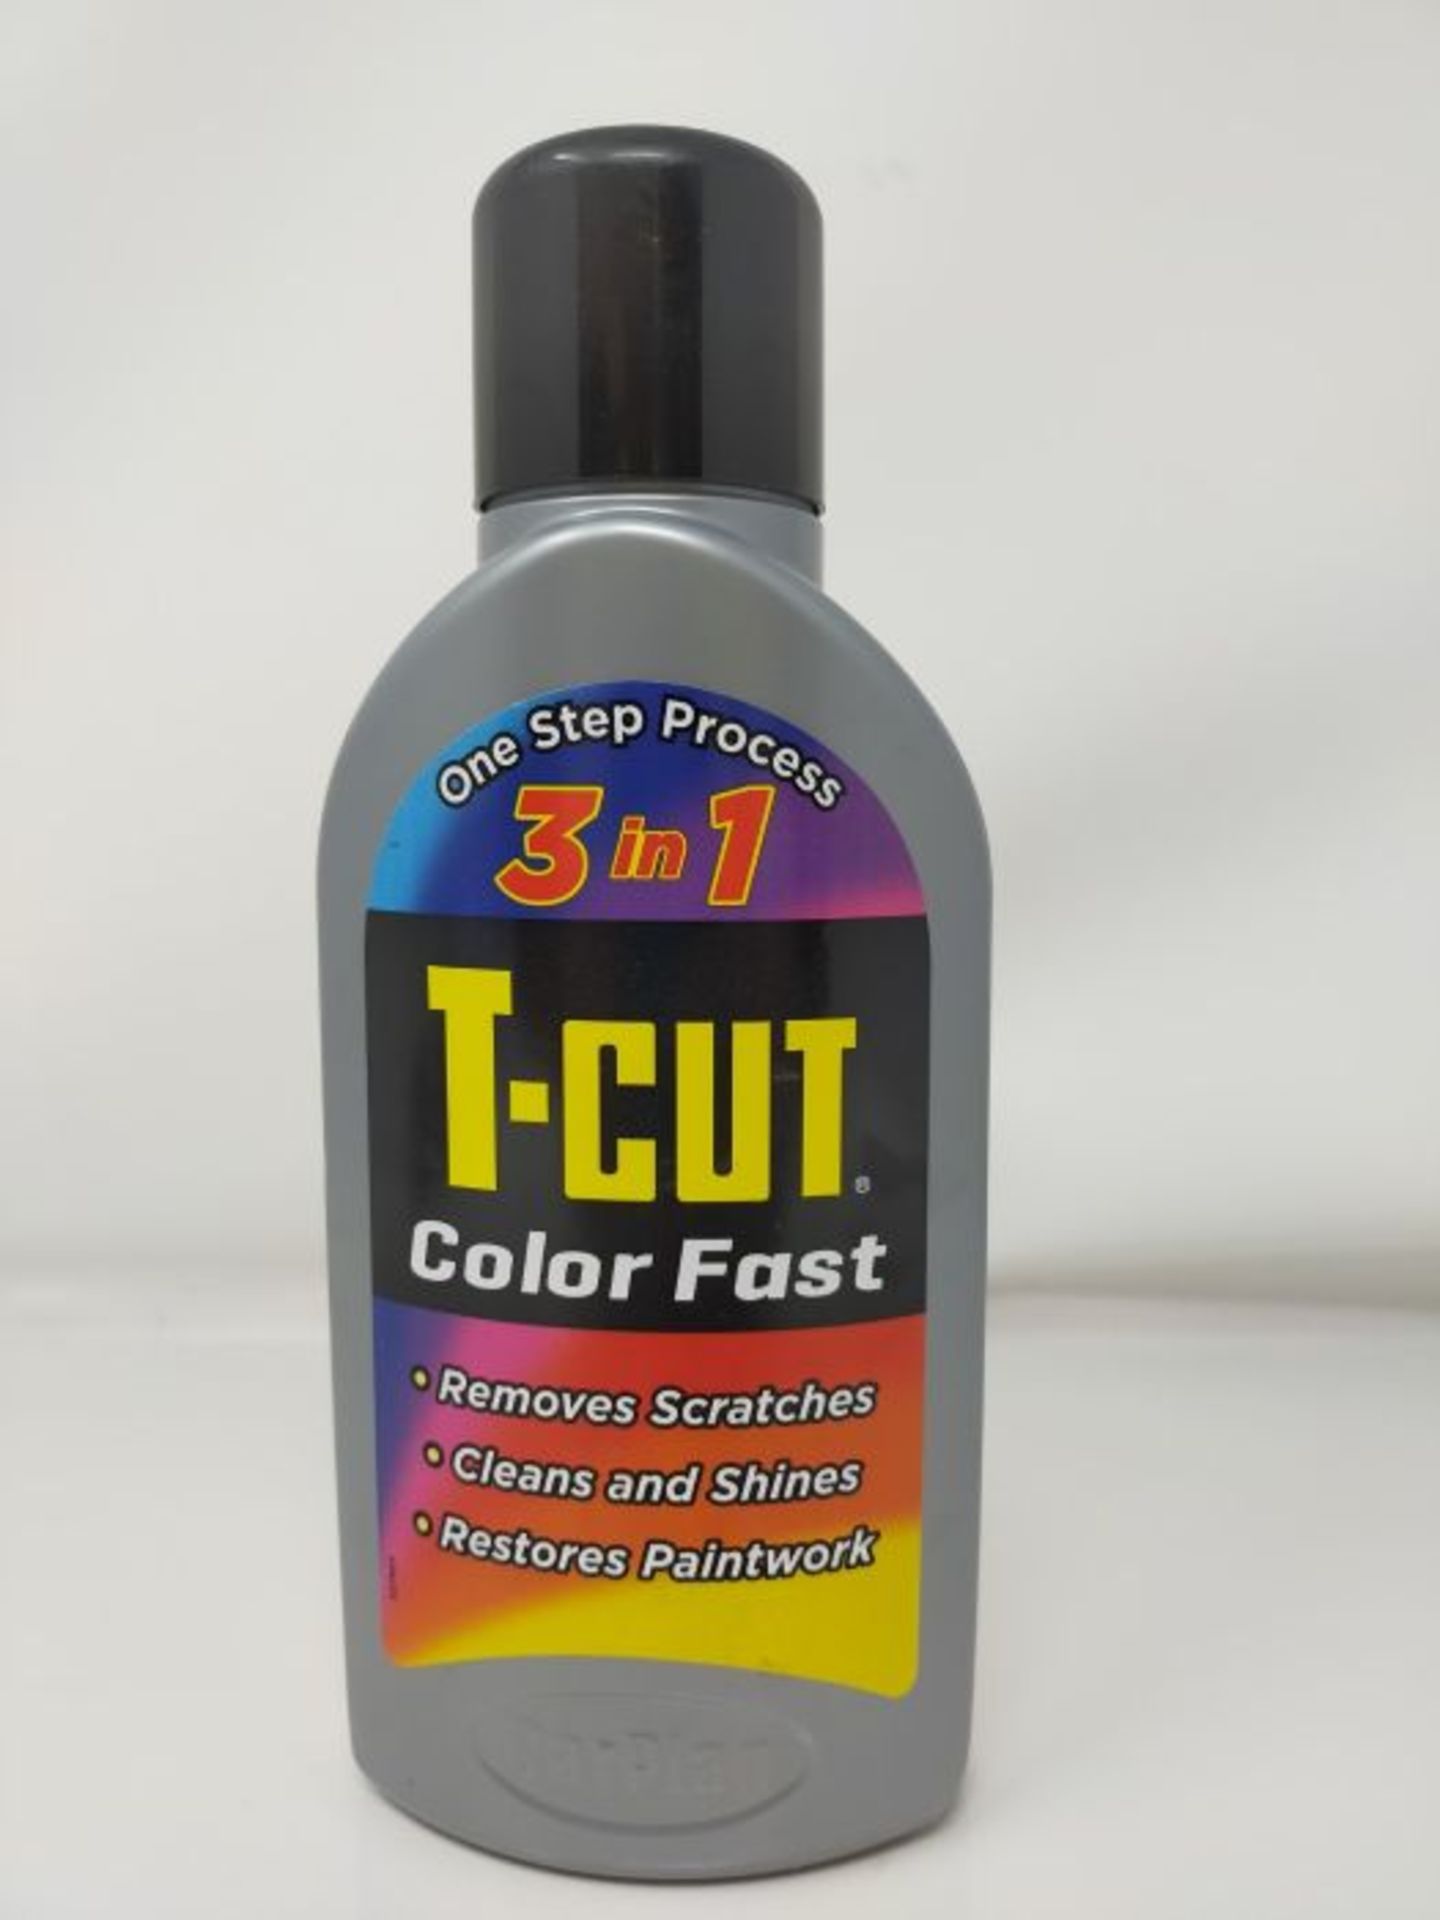 T-Cut Silver Scratch Remover Color Fast Paintwork Restorer Car Polish - 500ml * 13 Col - Image 2 of 2